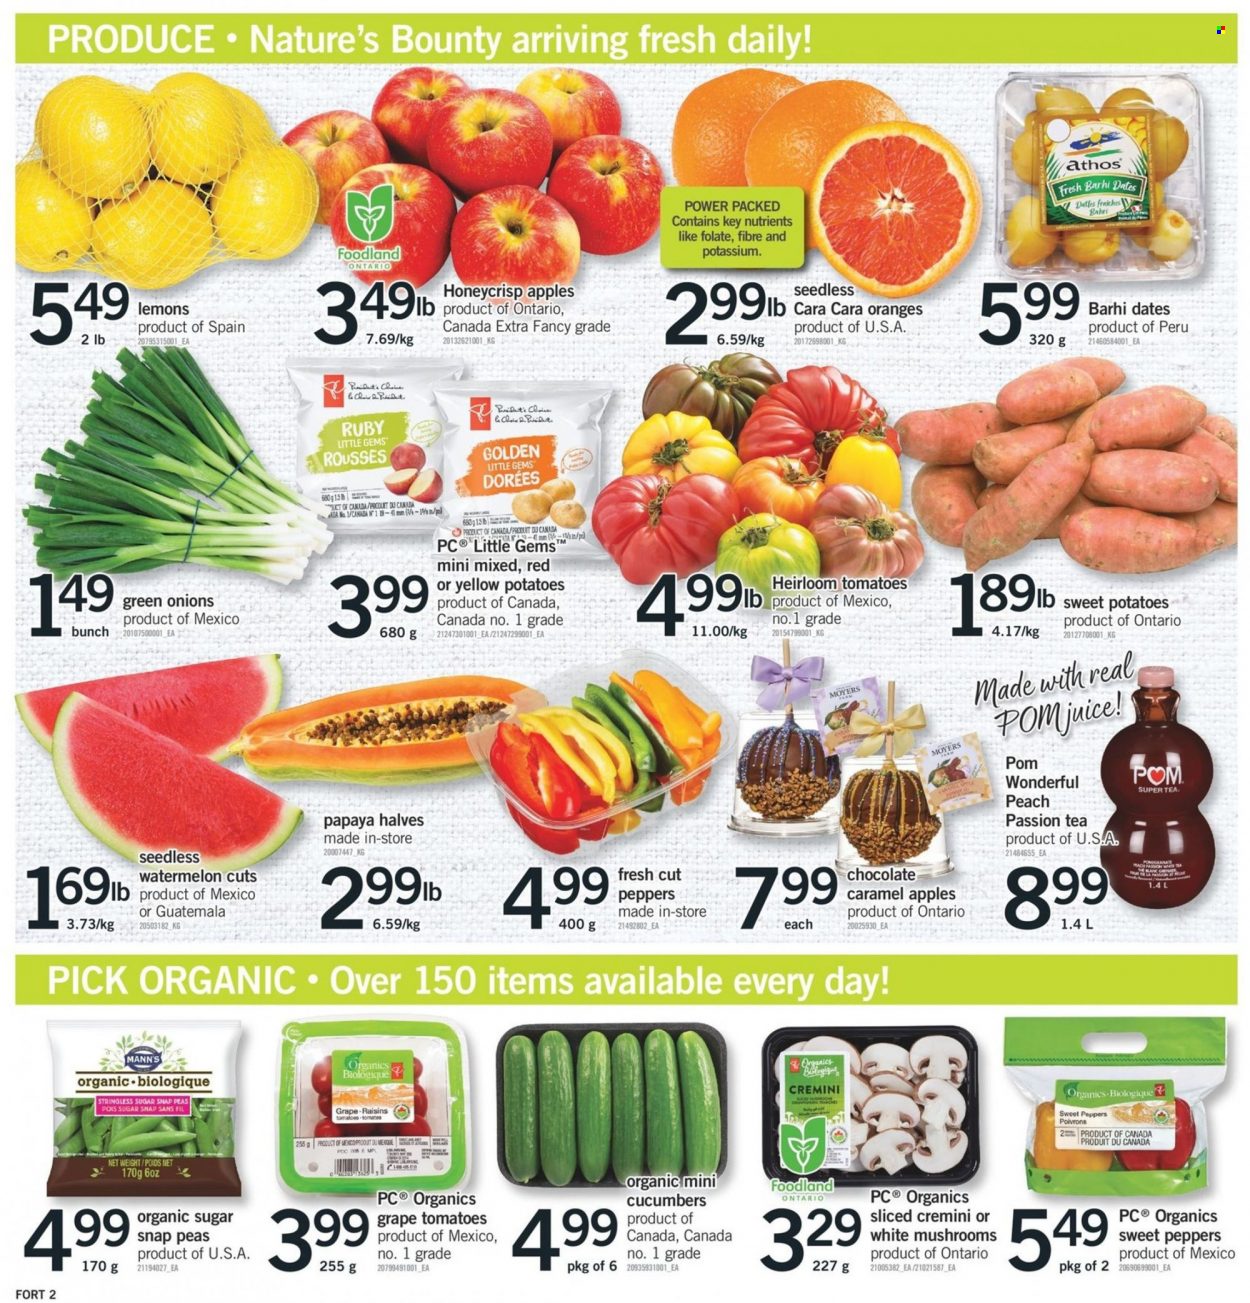 thumbnail - Fortinos Flyer - March 23, 2023 - March 29, 2023 - Sales products - mushrooms, cucumber, sweet peppers, sweet potato, tomatoes, potatoes, peas, peppers, green onion, apples, watermelon, papaya, oranges, pomegranate, lemons, snap peas, chocolate, caramel, dried fruit, tea, Nature's Bounty, raisins. Page 3.